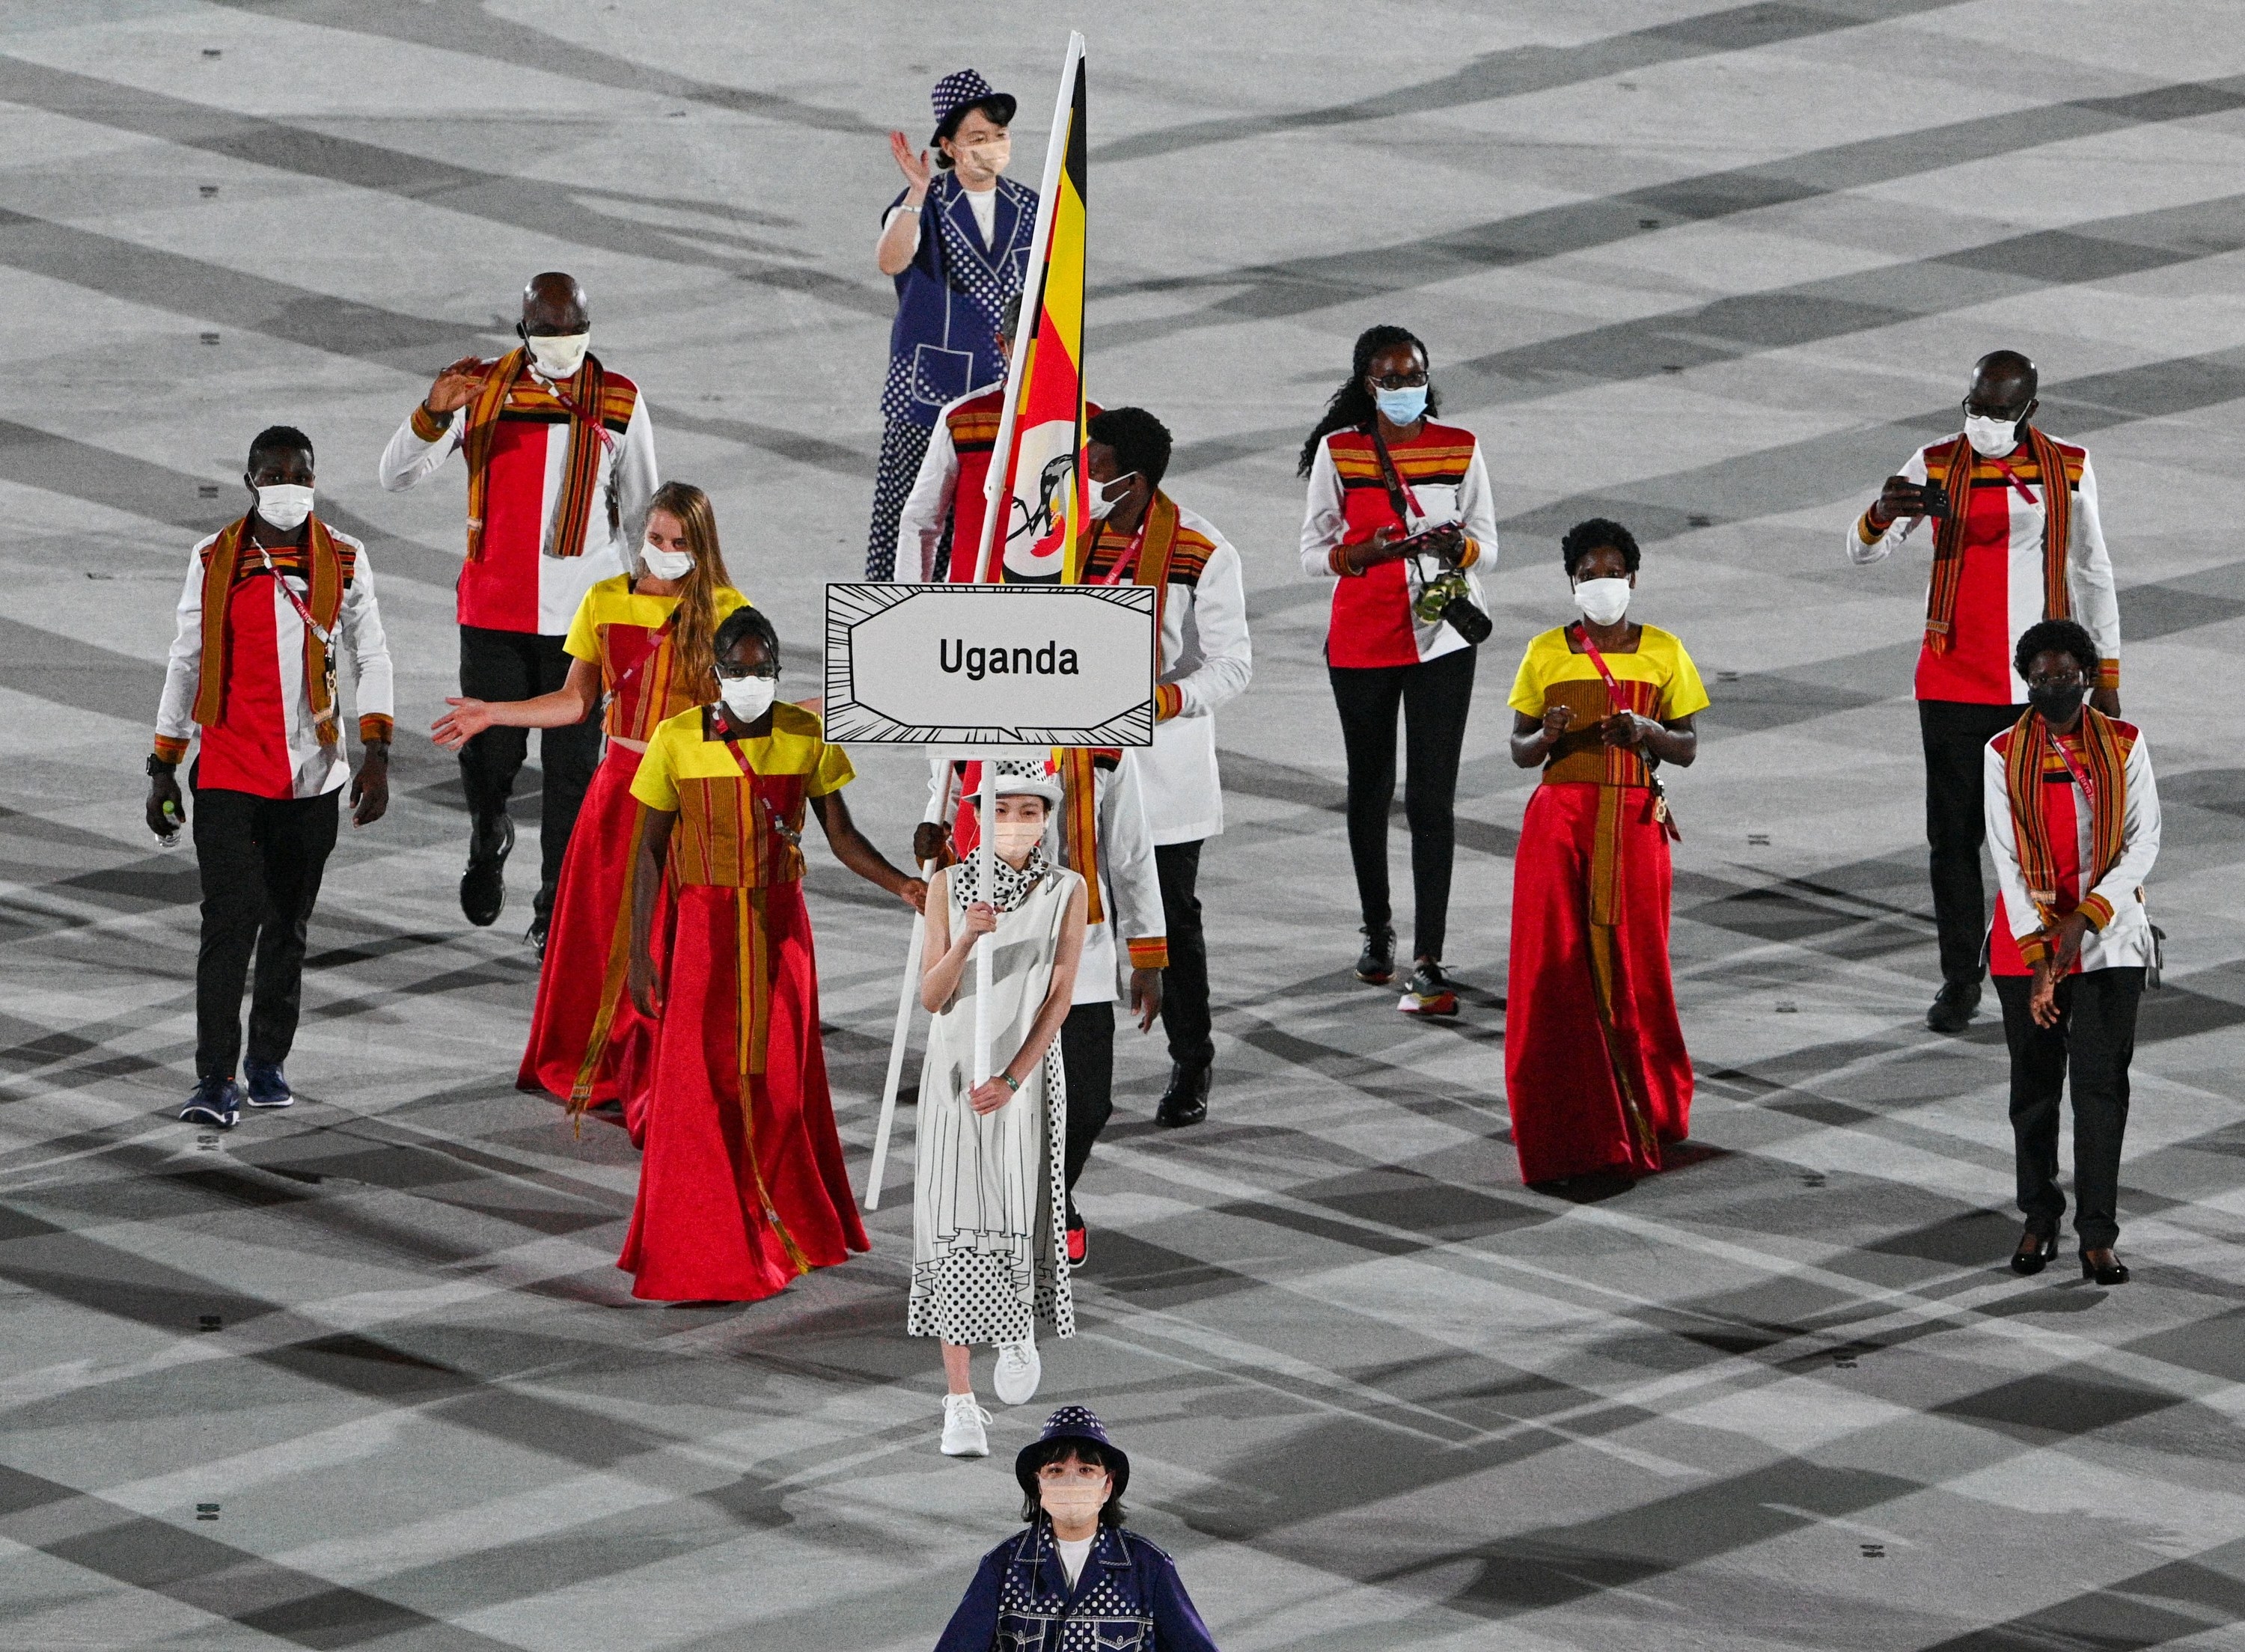 The athletes wore mutlicolored traditional dresses and tops